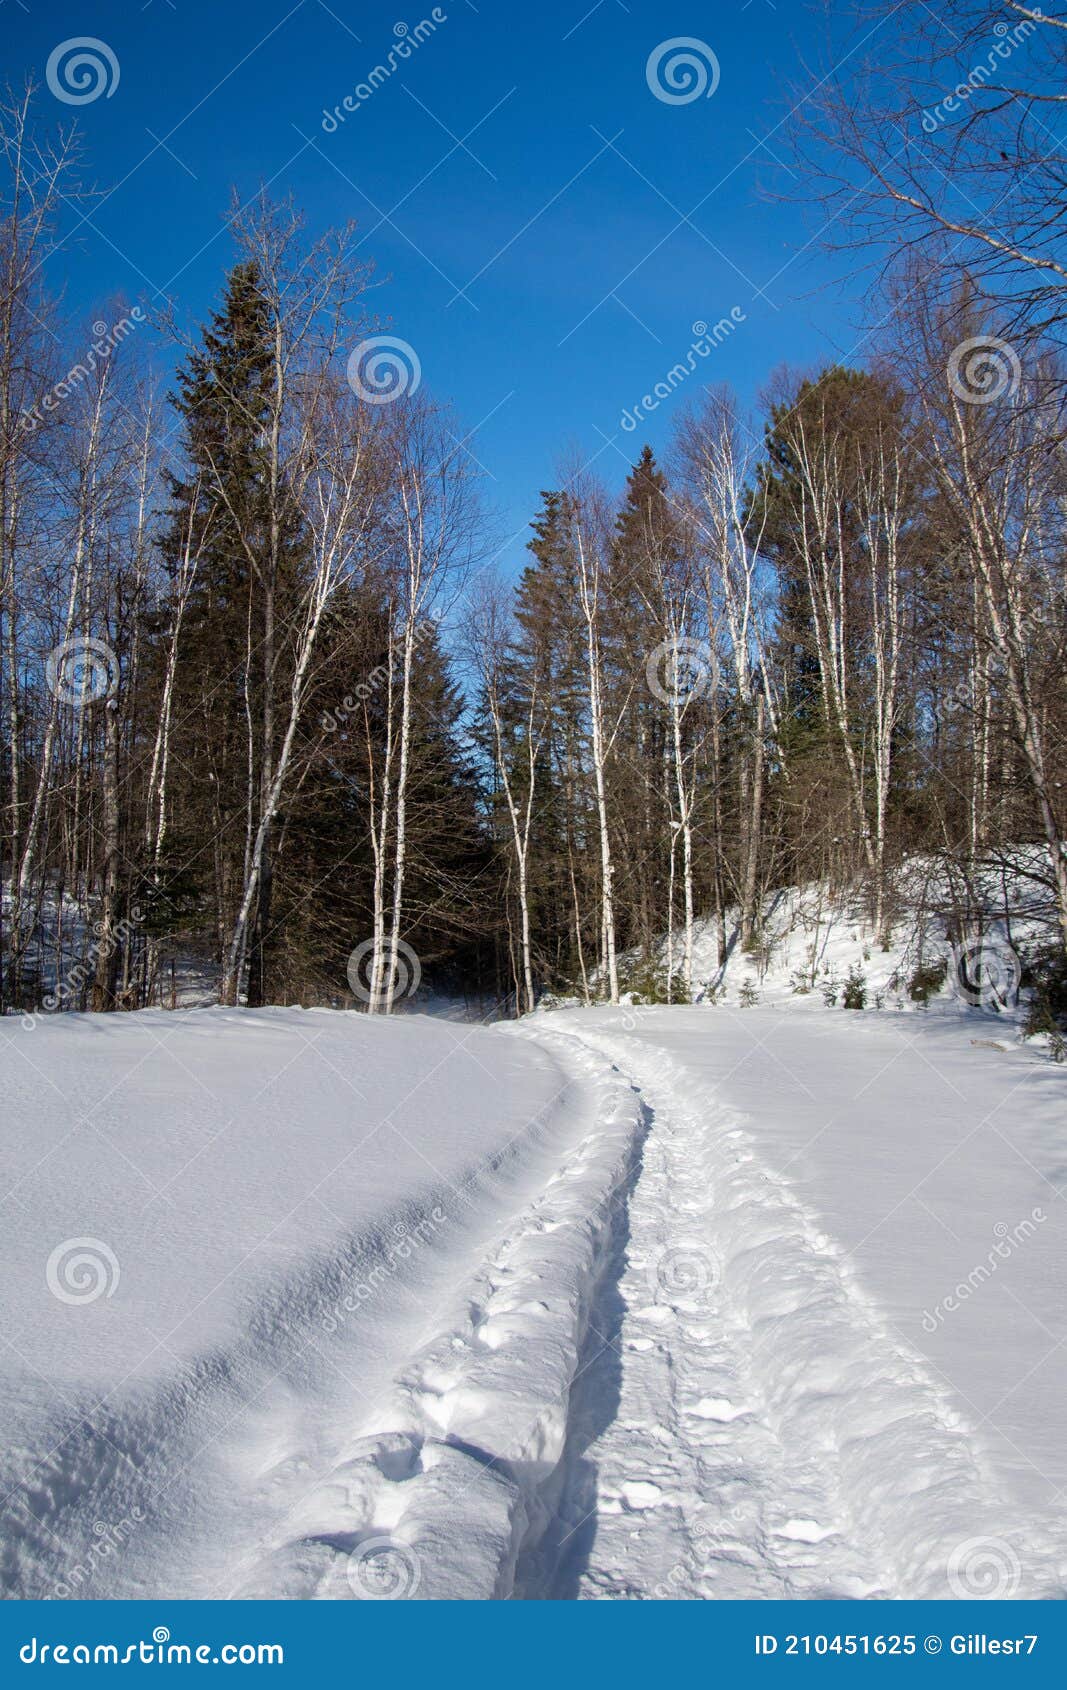 snowshoe trail, winter landsacape on the countryside